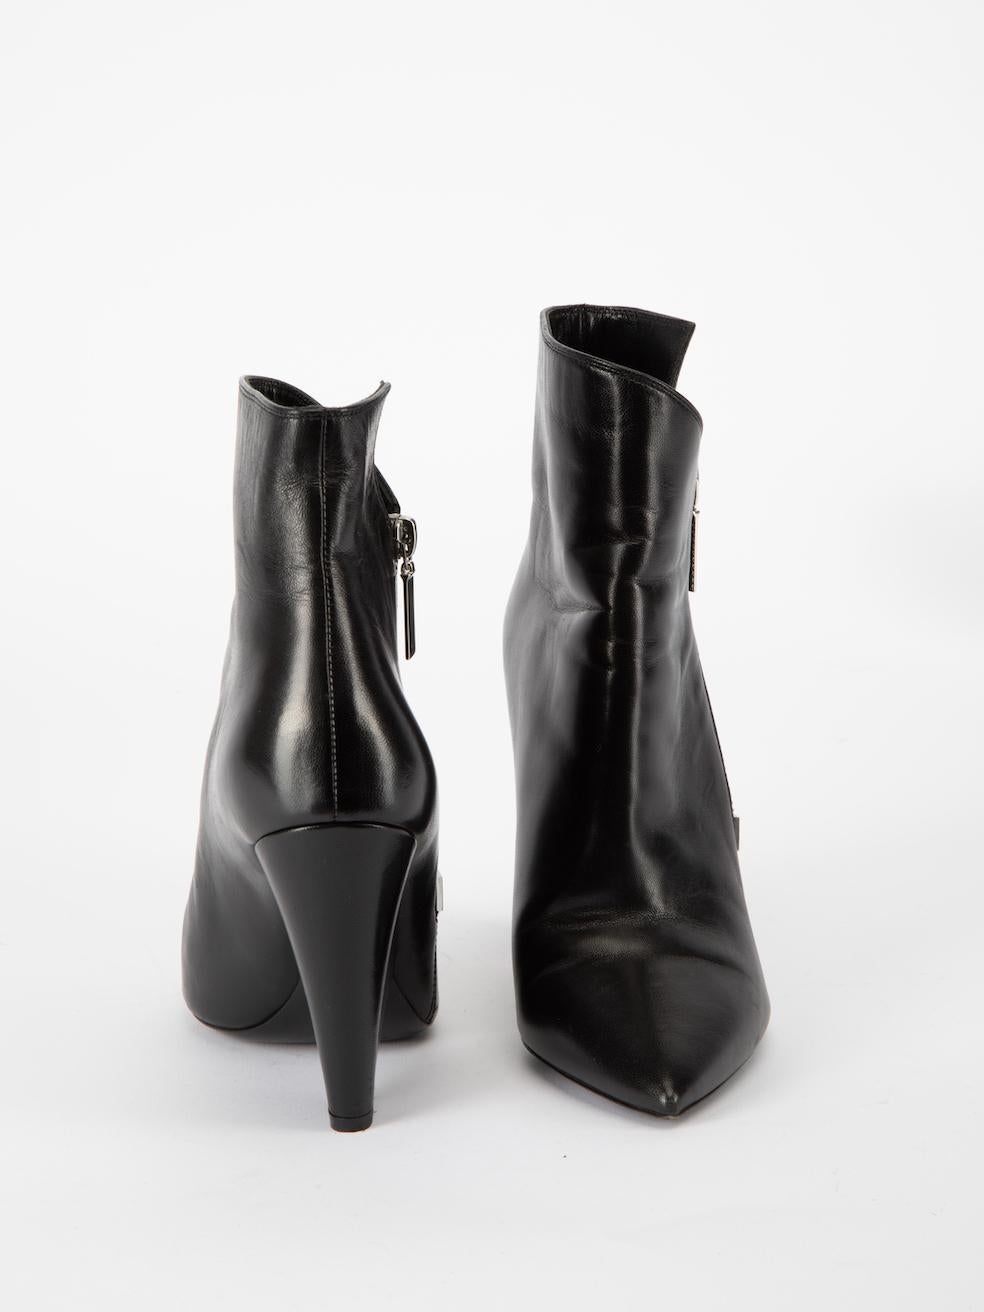 Saint Laurent Women's Black Niki Pointed Toe Wedge Ankle Boots In Good Condition For Sale In London, GB